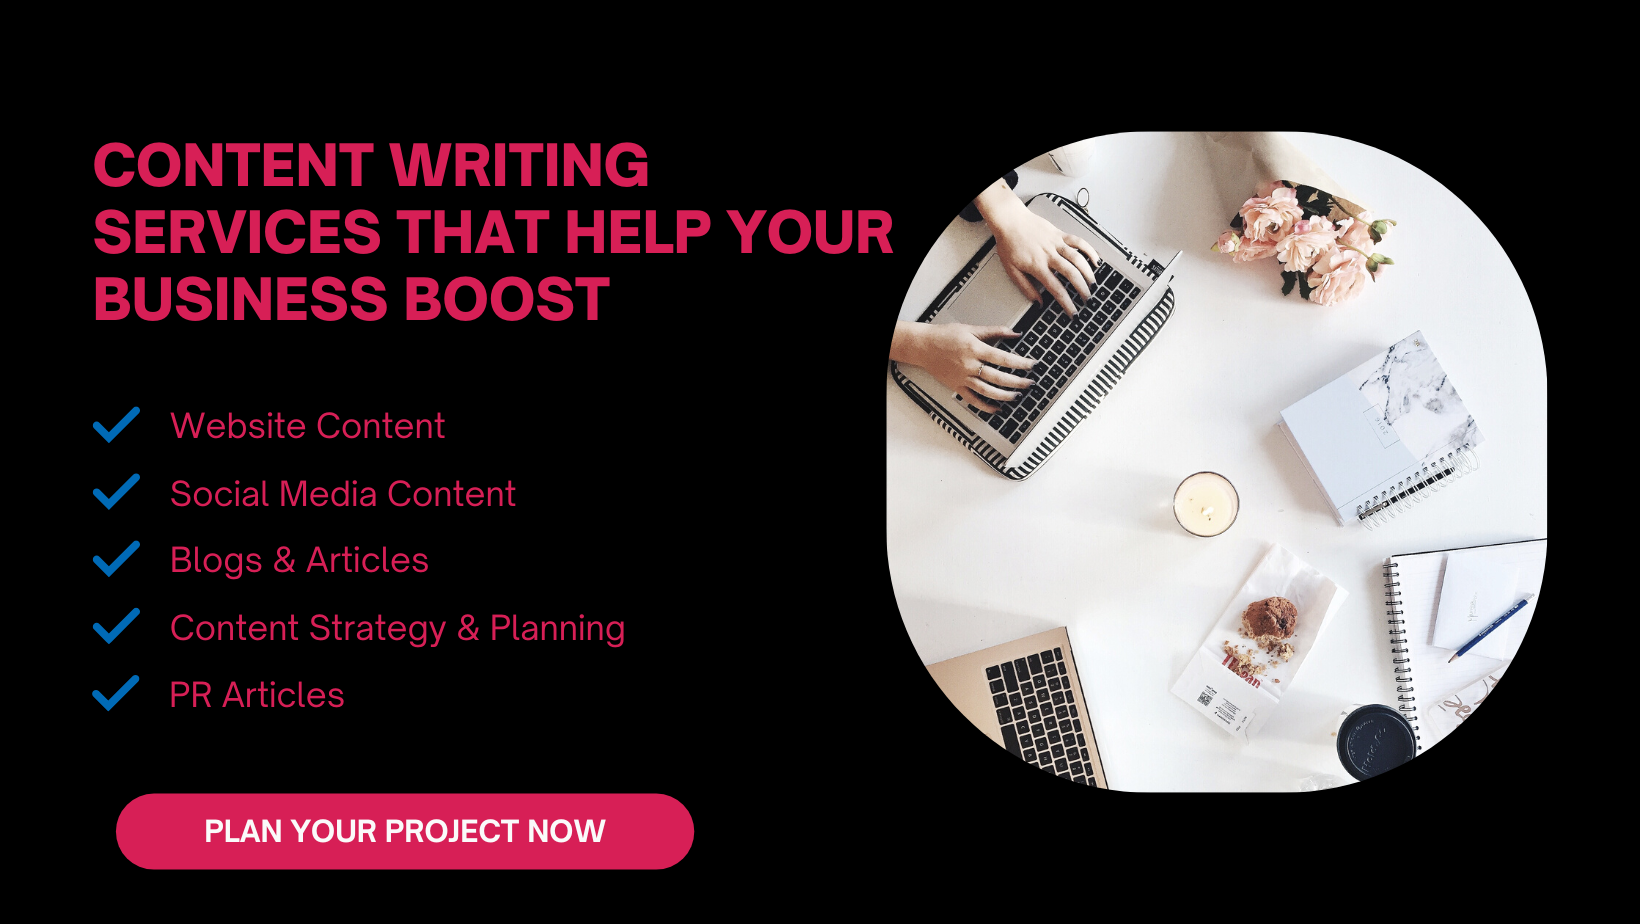 Content Writing To Boost Business|Content writing services